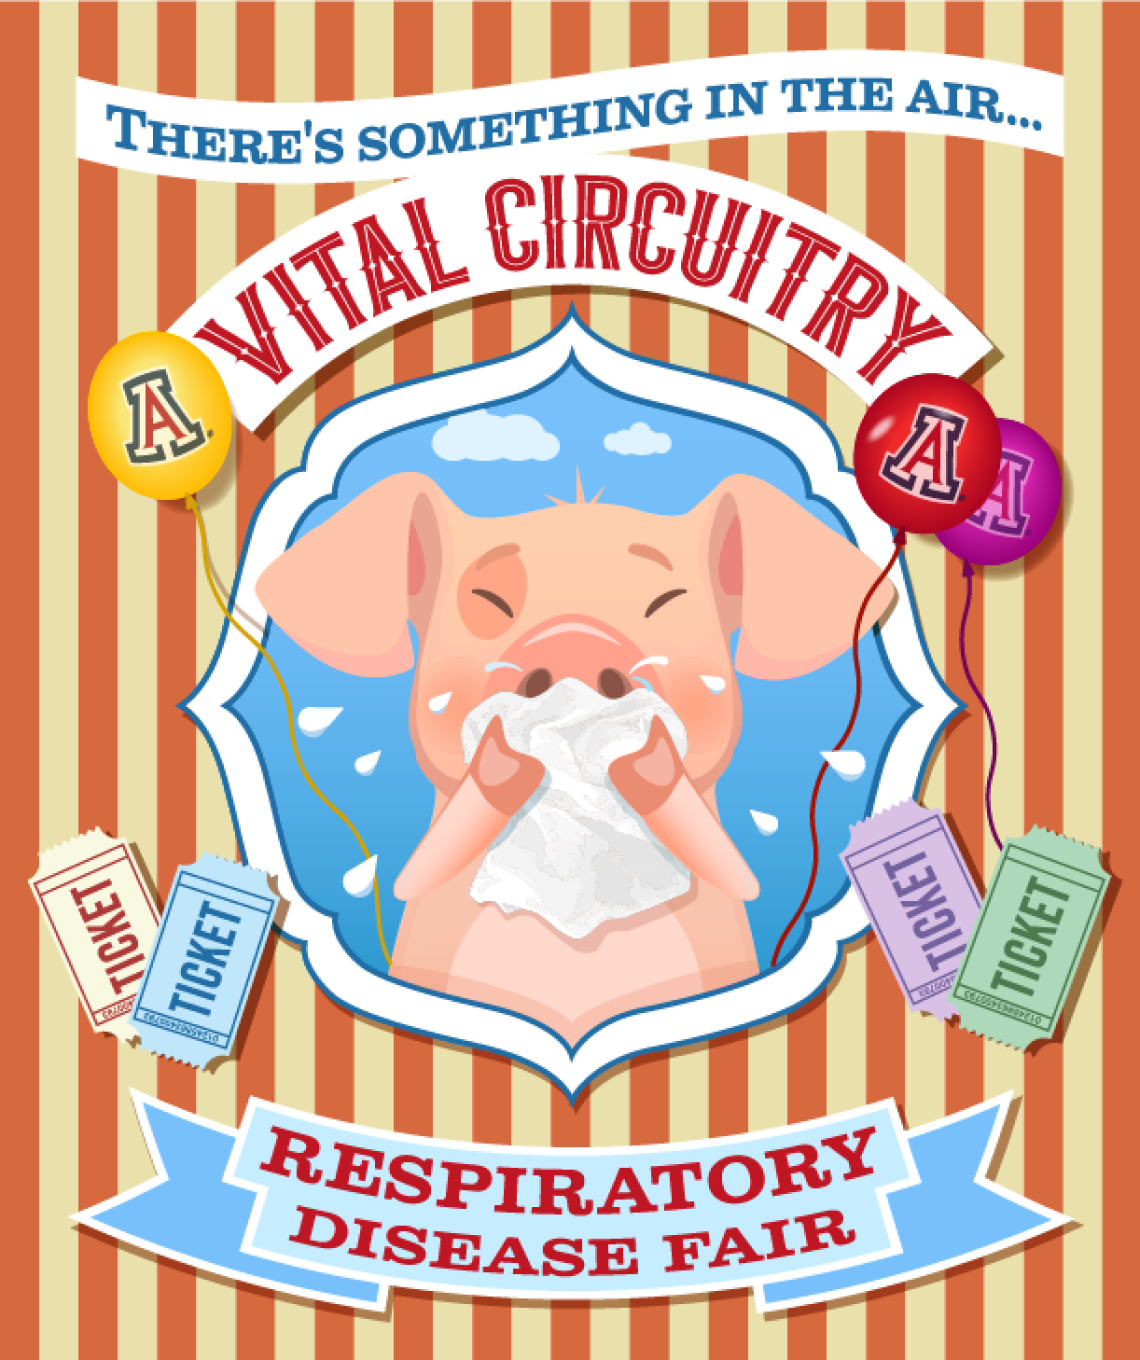 Image of a flyer for the Respiratory Disease Fair, a mock conference students participated in.